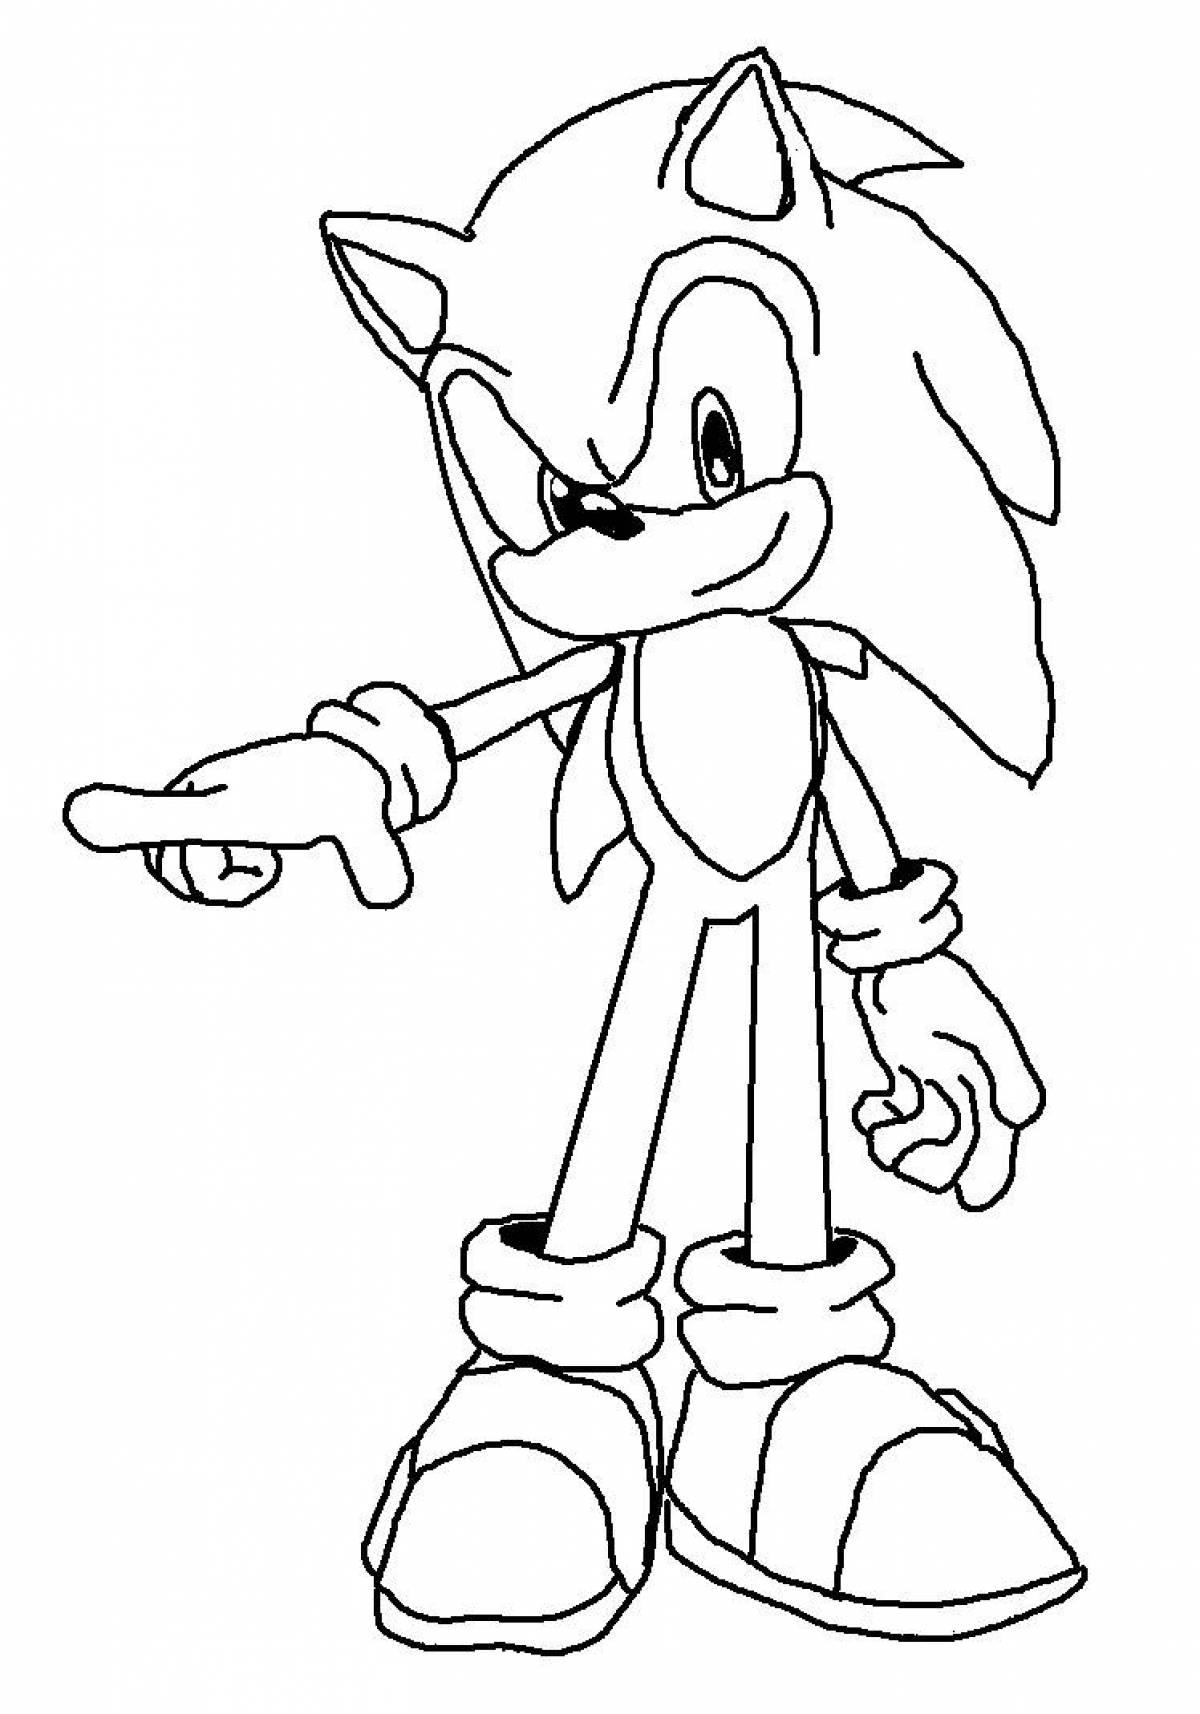 Charming sonic coloring book